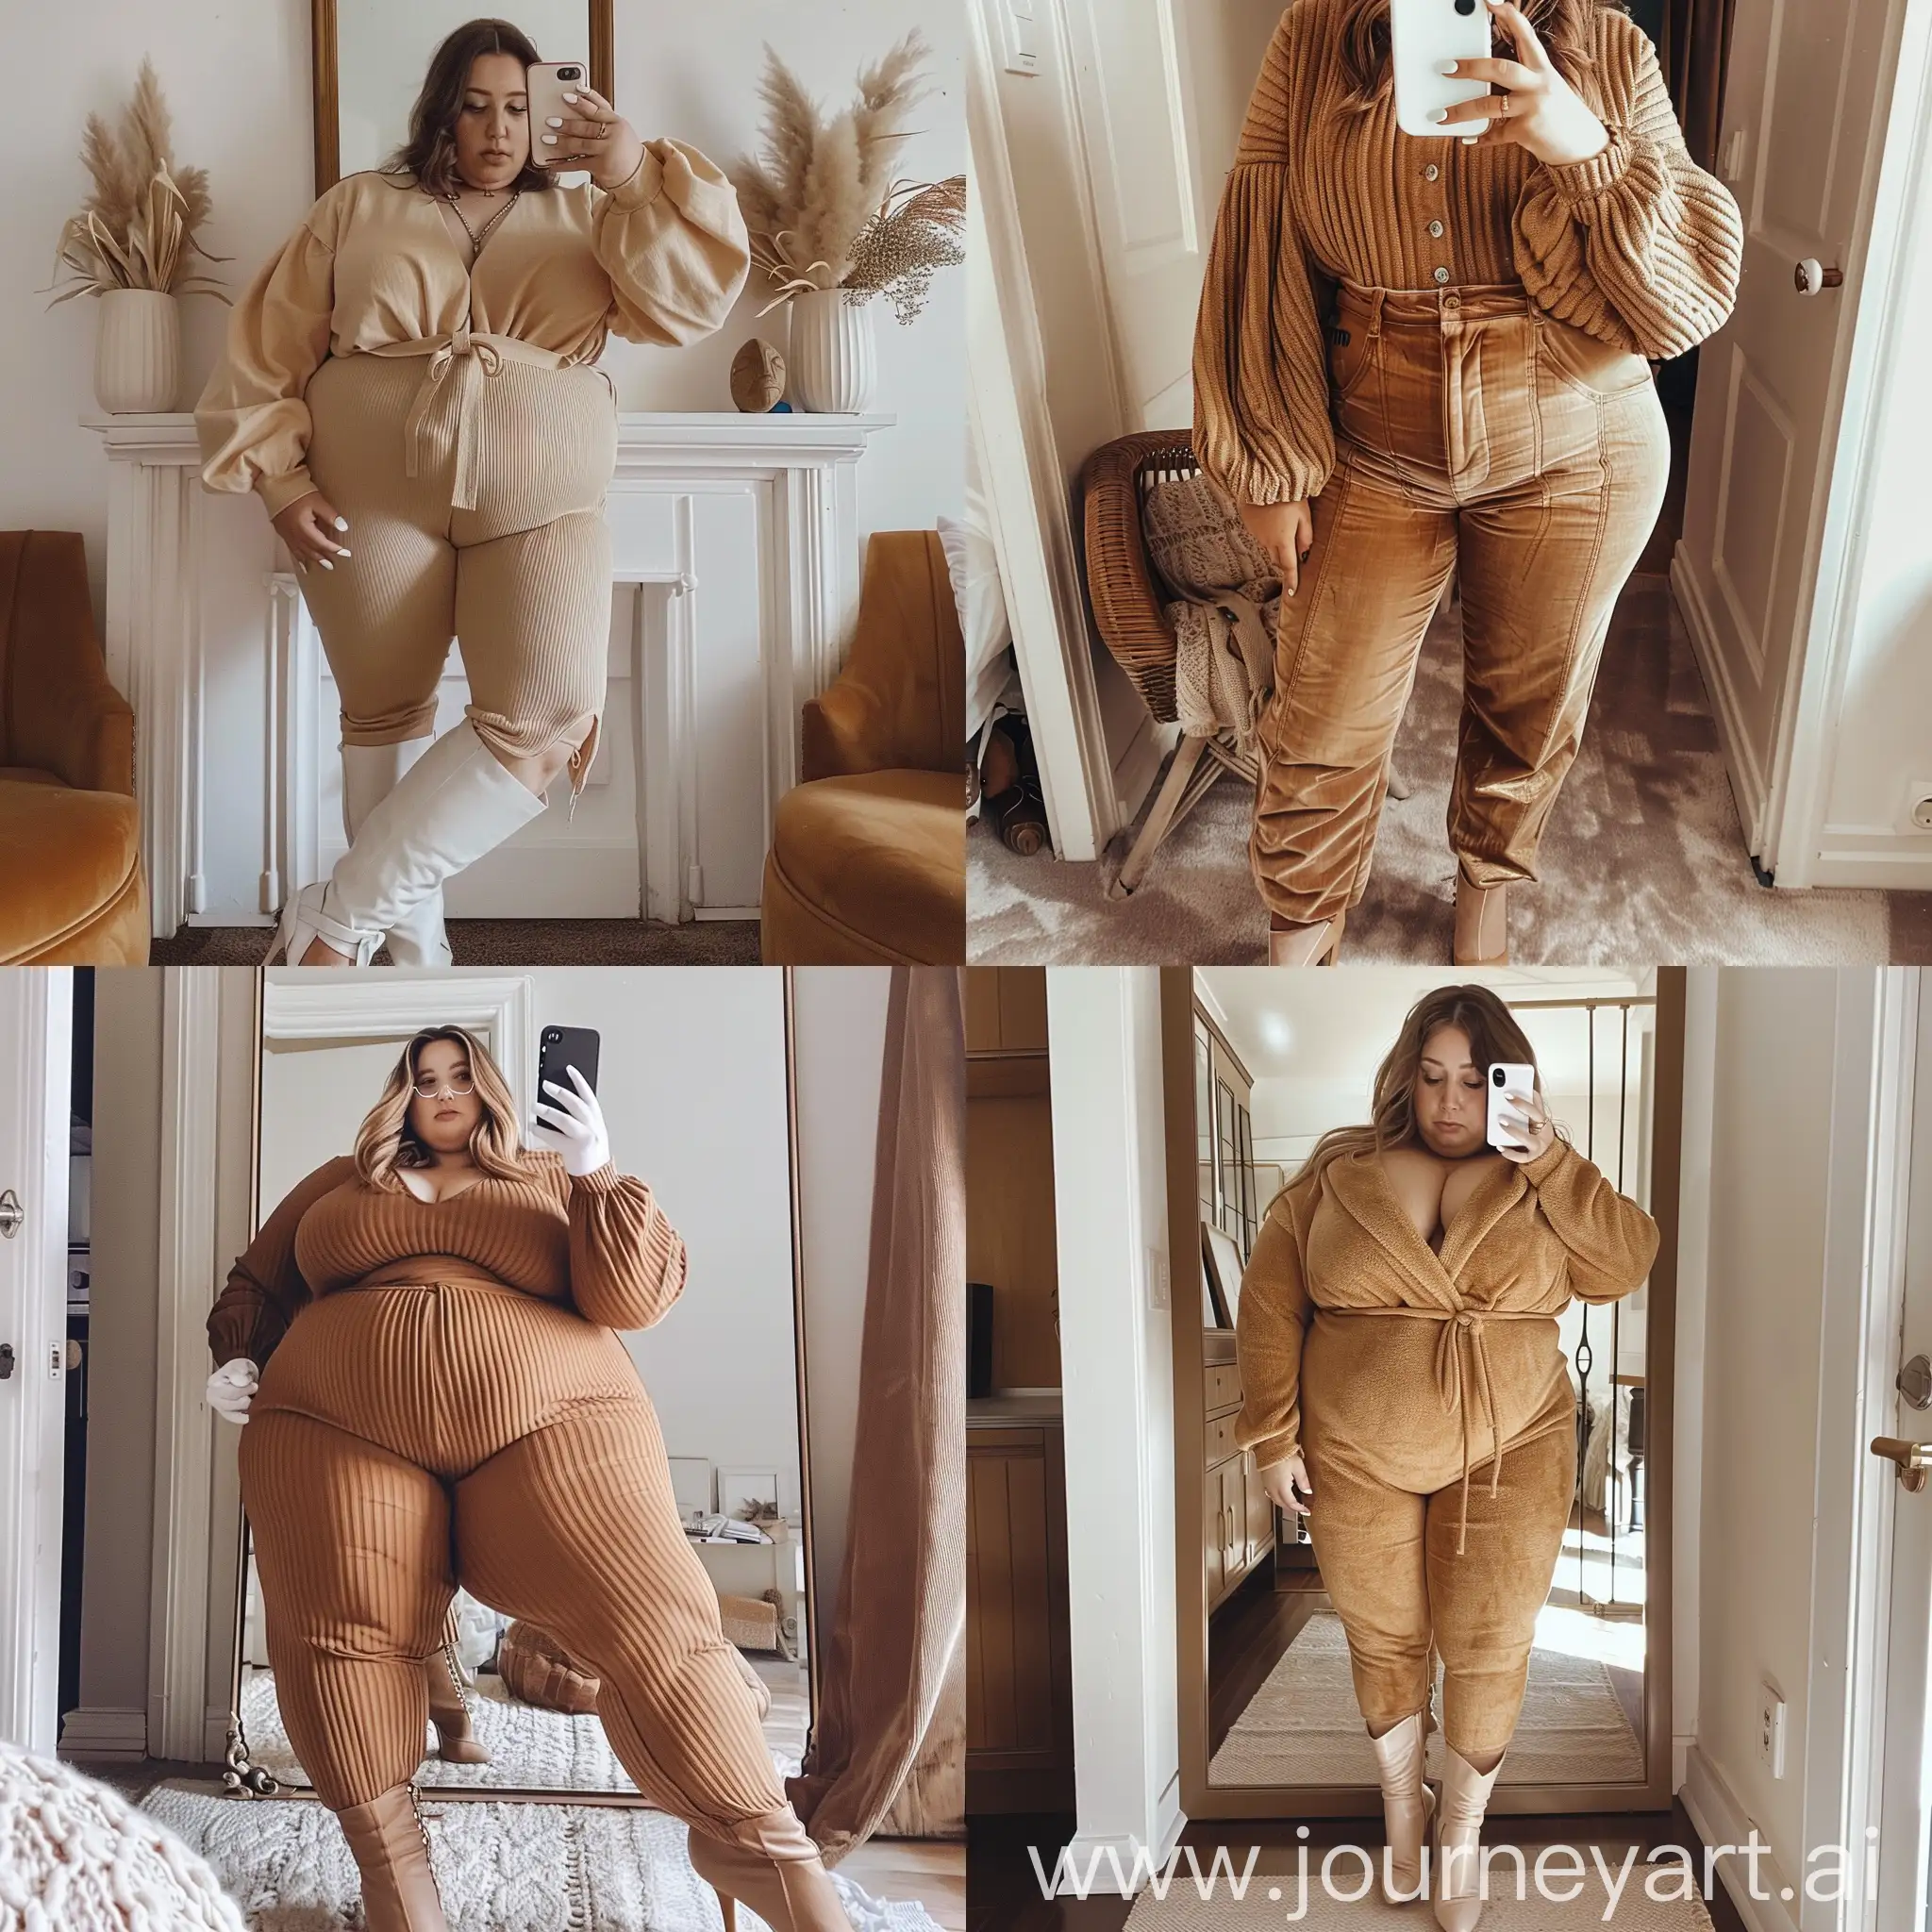 Aesthetic full body Instagram photo: fashion blogger mirror selfie, fat, trendy clothed, woman, 20's, white gel nail polish, heeled boots, brown warm color tones